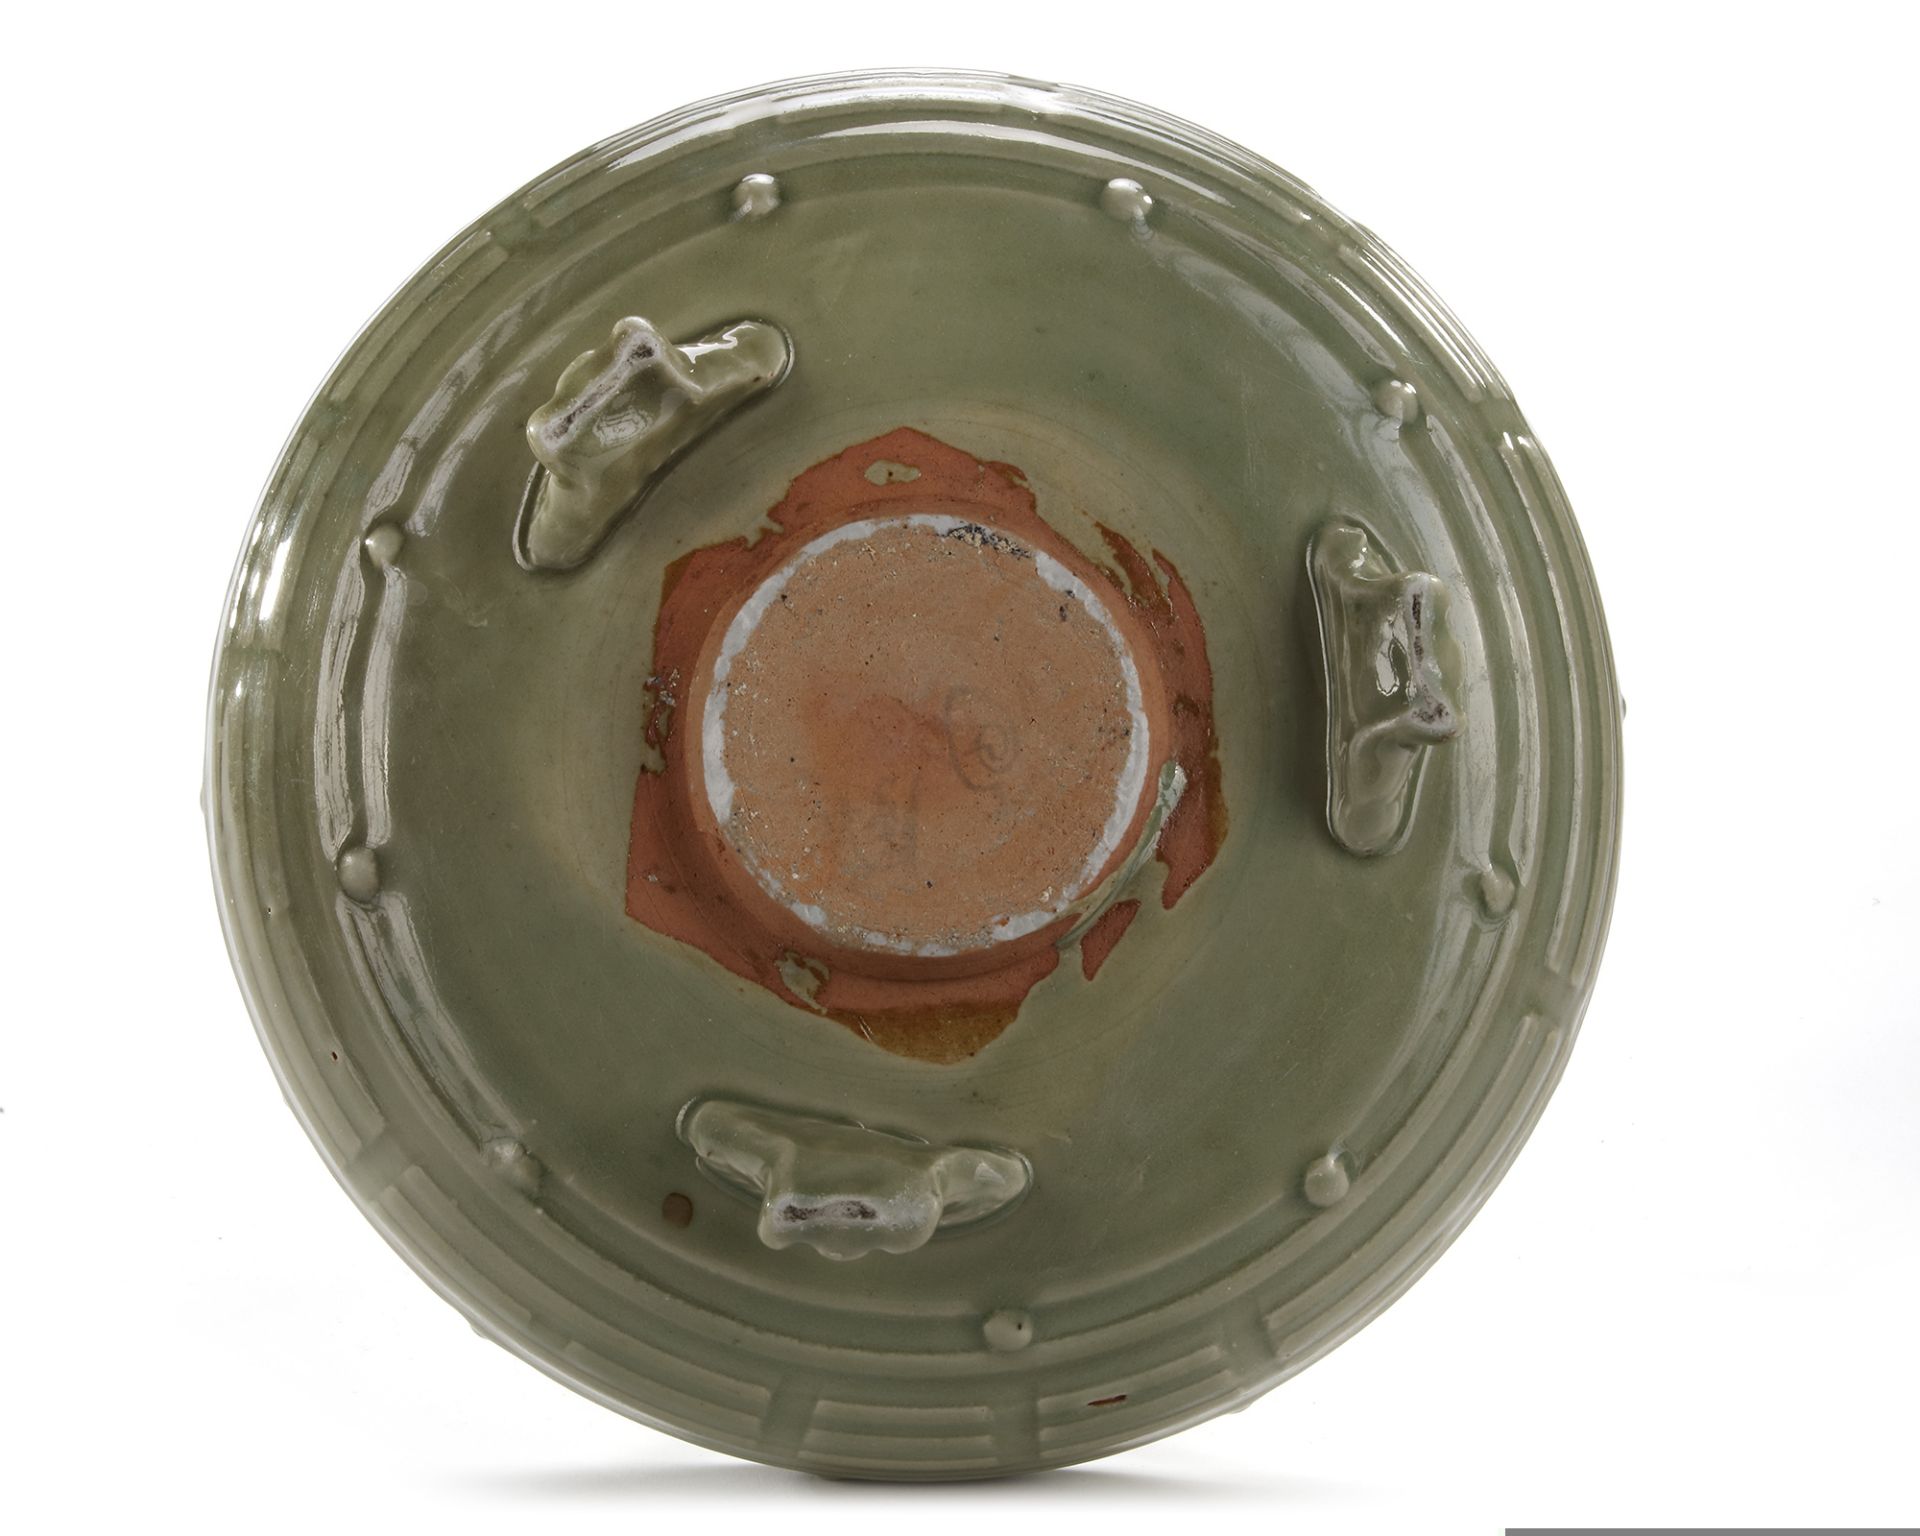 A CHINESE LONGQUAN CELADON 'EIGHT TRIGRAMS' TRIPOD CENSER LATE YUAN/EARLY MING DYNASTY (13TH-14TH CE - Bild 4 aus 4